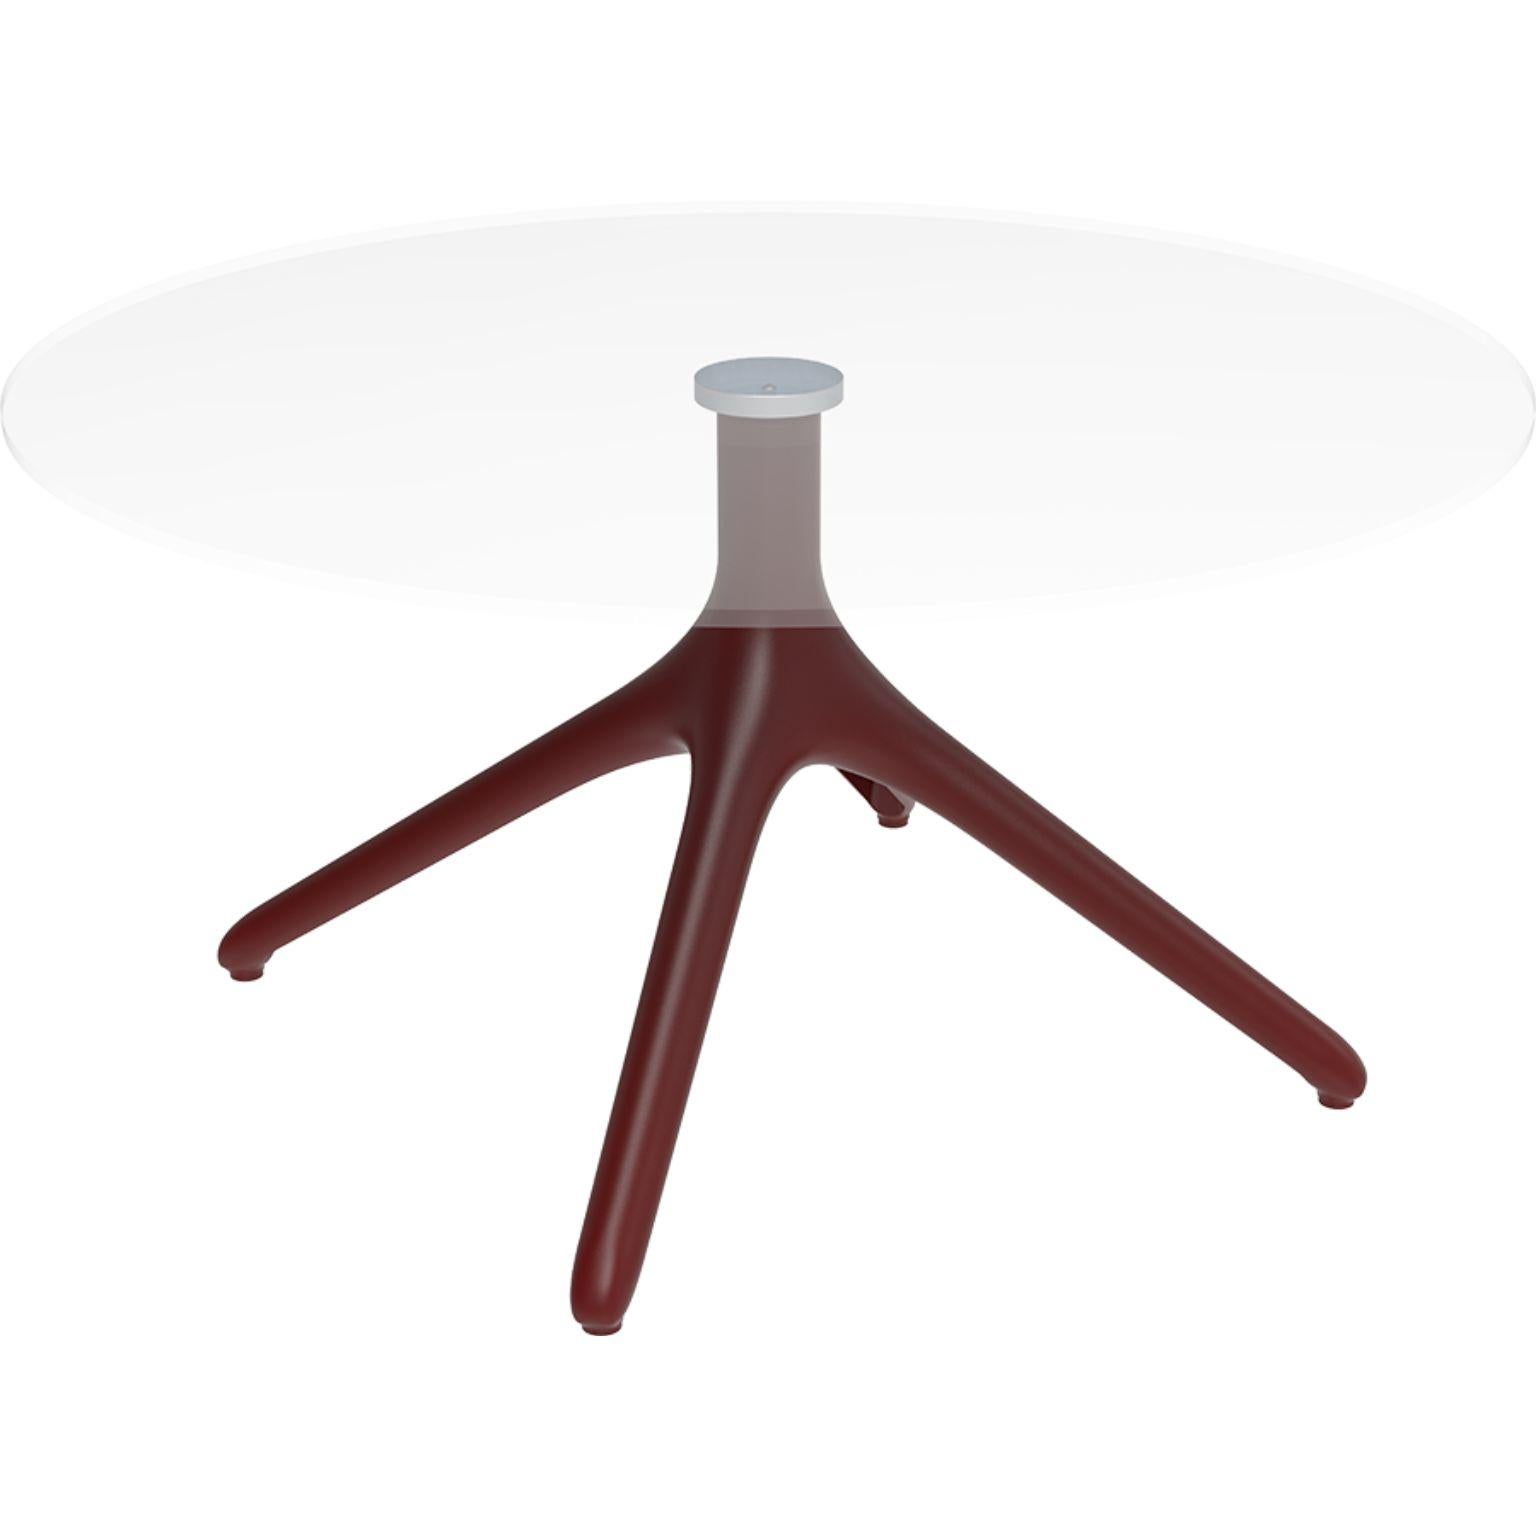 Uni burgundy table XL 50 by Mowee.
Dimensions: D50 x H50 cm.
Material: Aluminium, tempered glass.
Weight: 8.8 kg.
Also Available in different colours and finishes.

A table designed to be as versatile as possible and can coexist with a variety